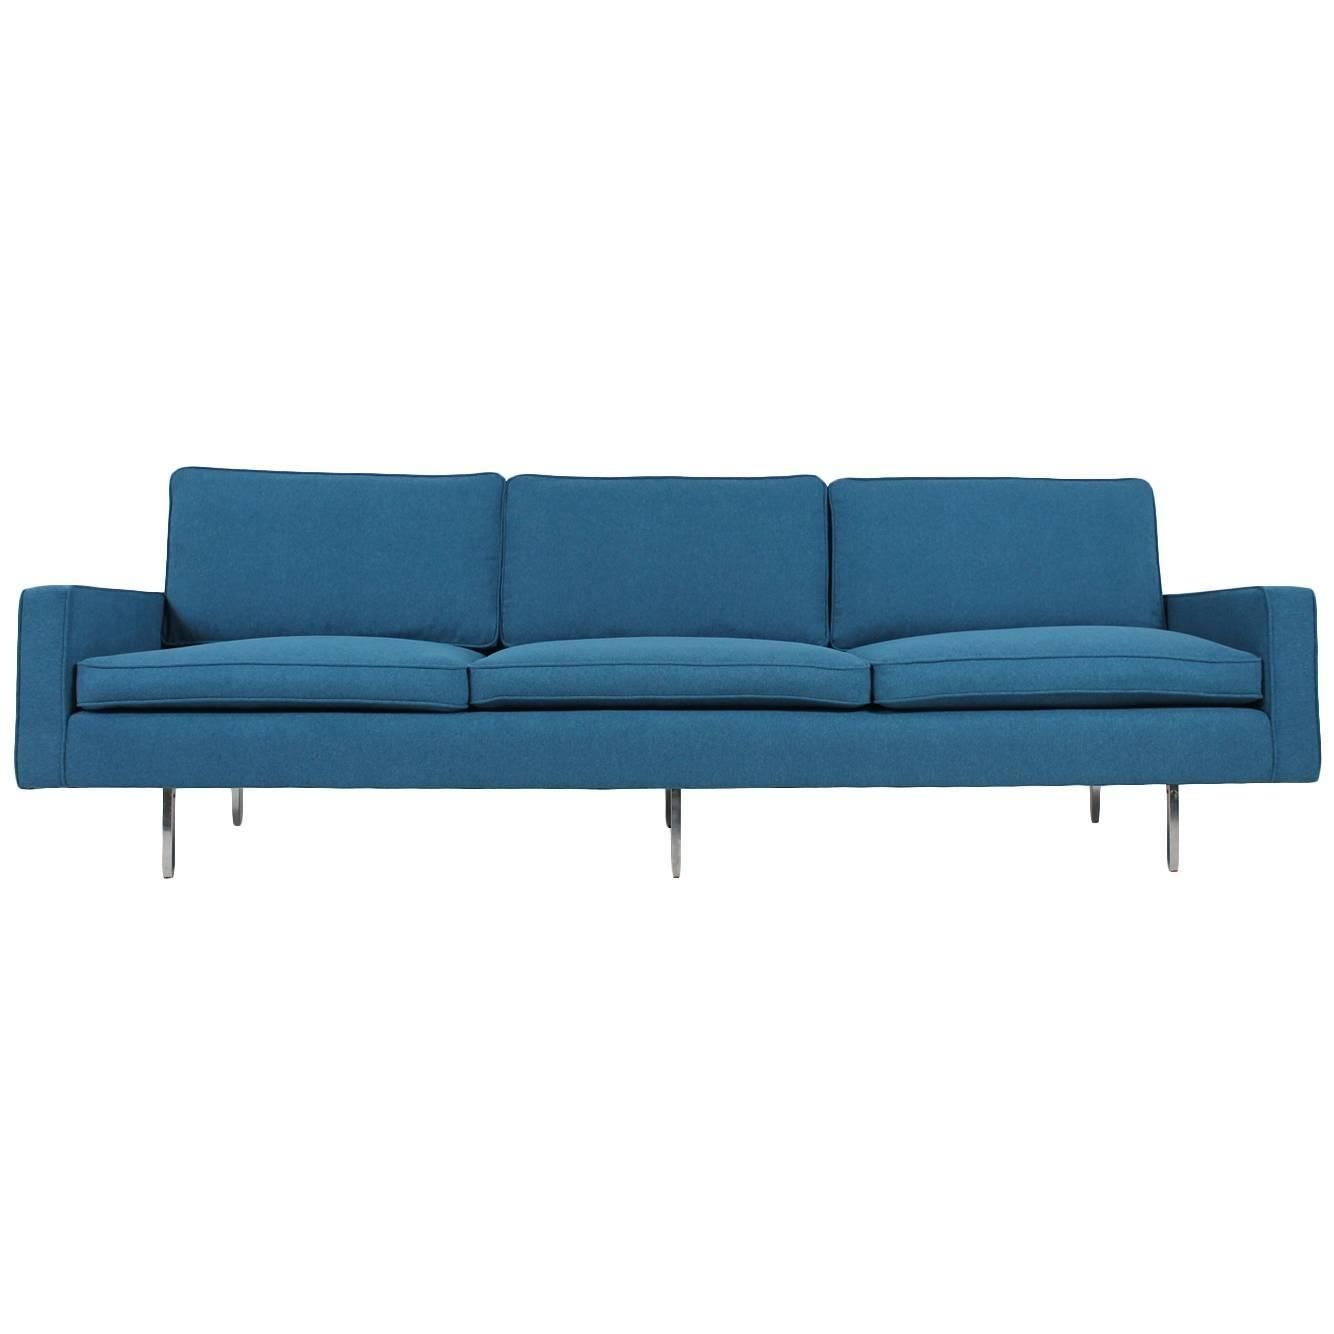 Beautiful Mid Century Florence Knoll Sofa Mod 25 Bc Knoll With Regard To Florence Sofas And Loveseats (View 11 of 15)